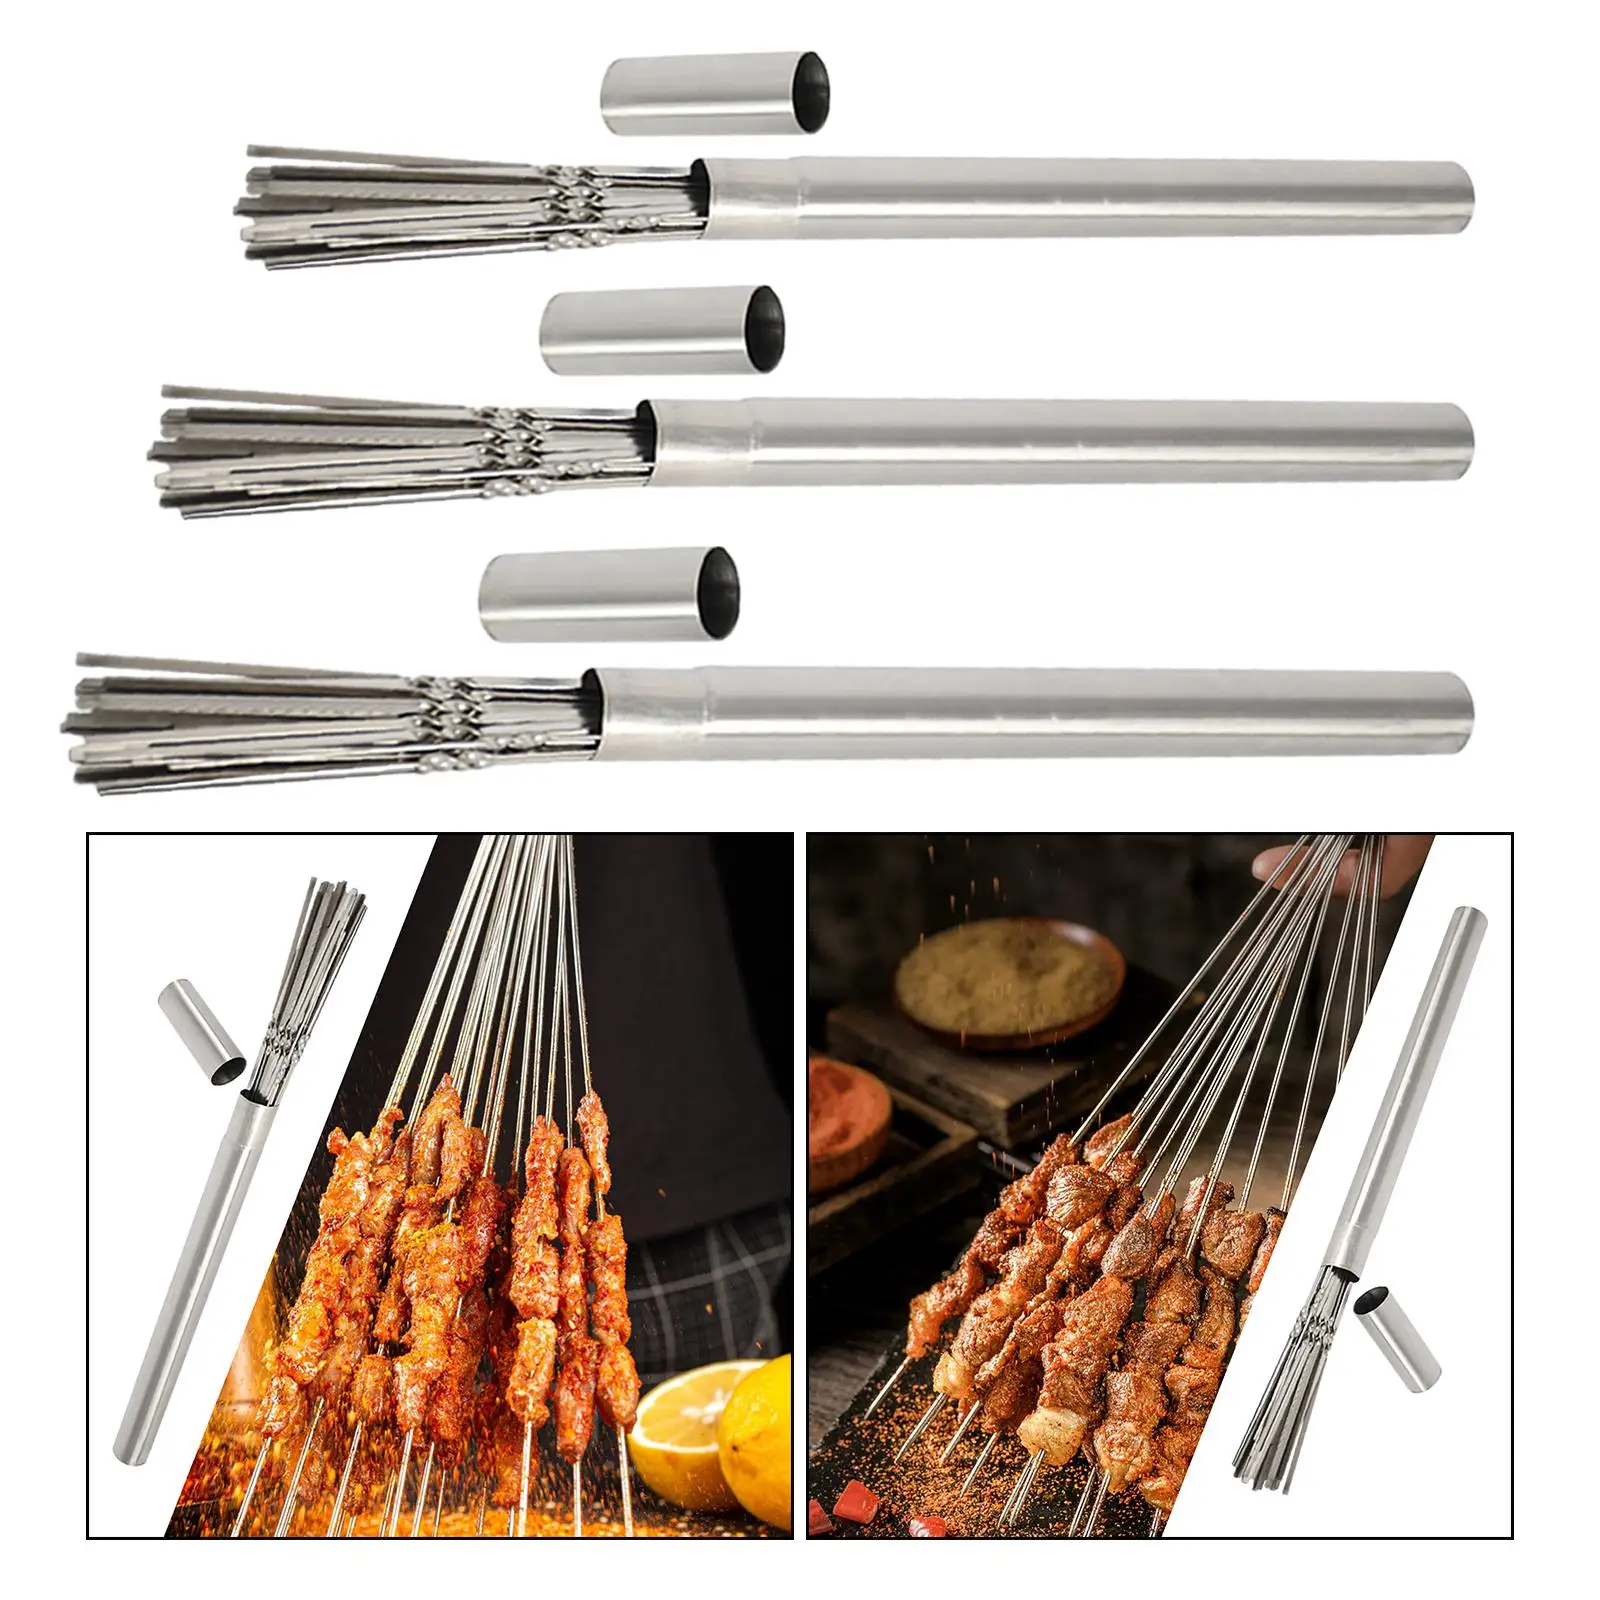 Metal Skewers for Grilling 50 Pieces Reusable Barbecue Skewers Pins Kabob Skewers for Kabob Chicken Meats Seafood Grilling